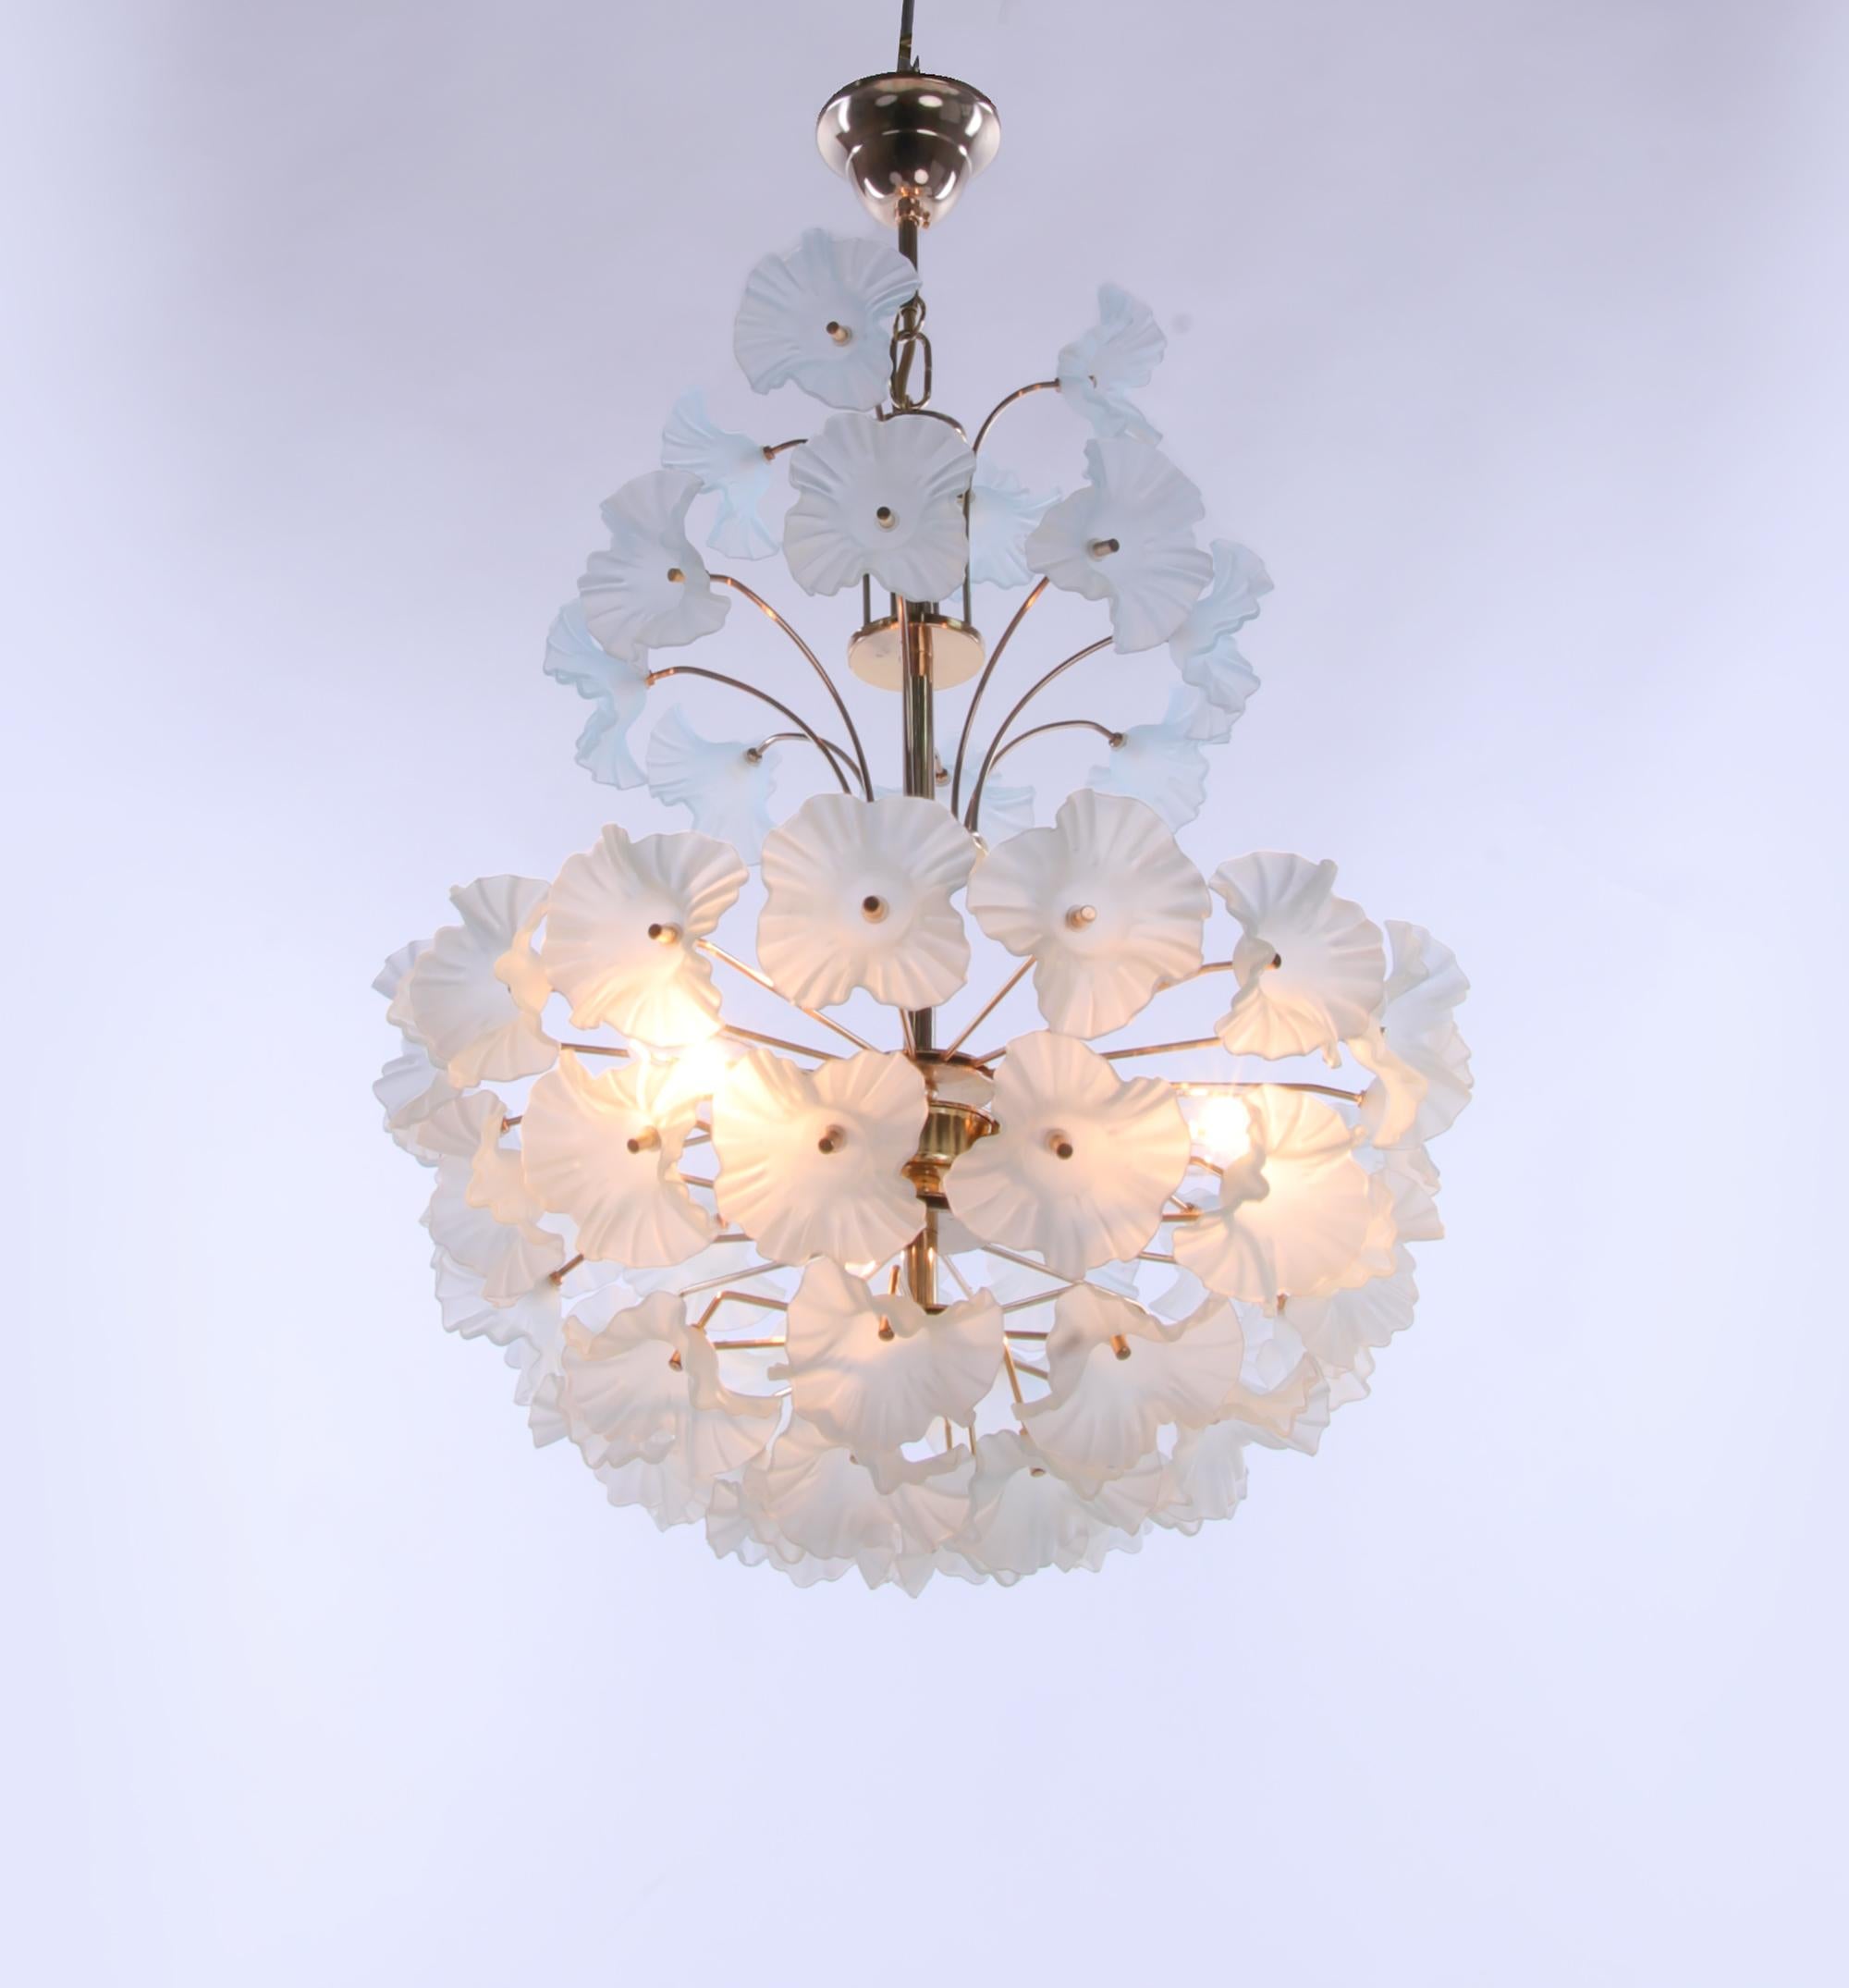 Elegant vintage midcentury hibiscus flower bouquet chandelier with turquoise glass flowers on a brass frame.
Measures: diameter 17.7